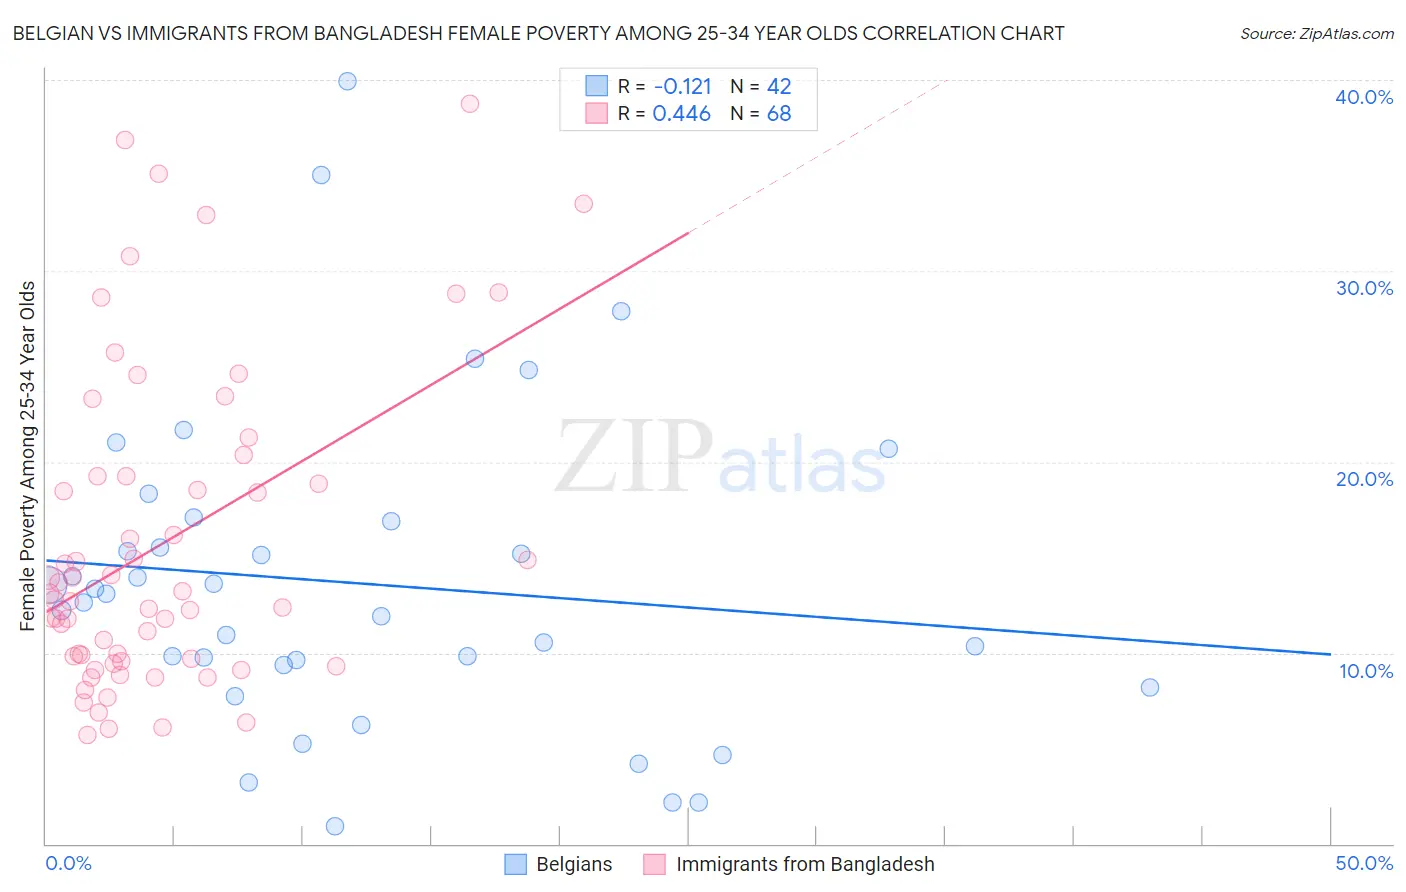 Belgian vs Immigrants from Bangladesh Female Poverty Among 25-34 Year Olds